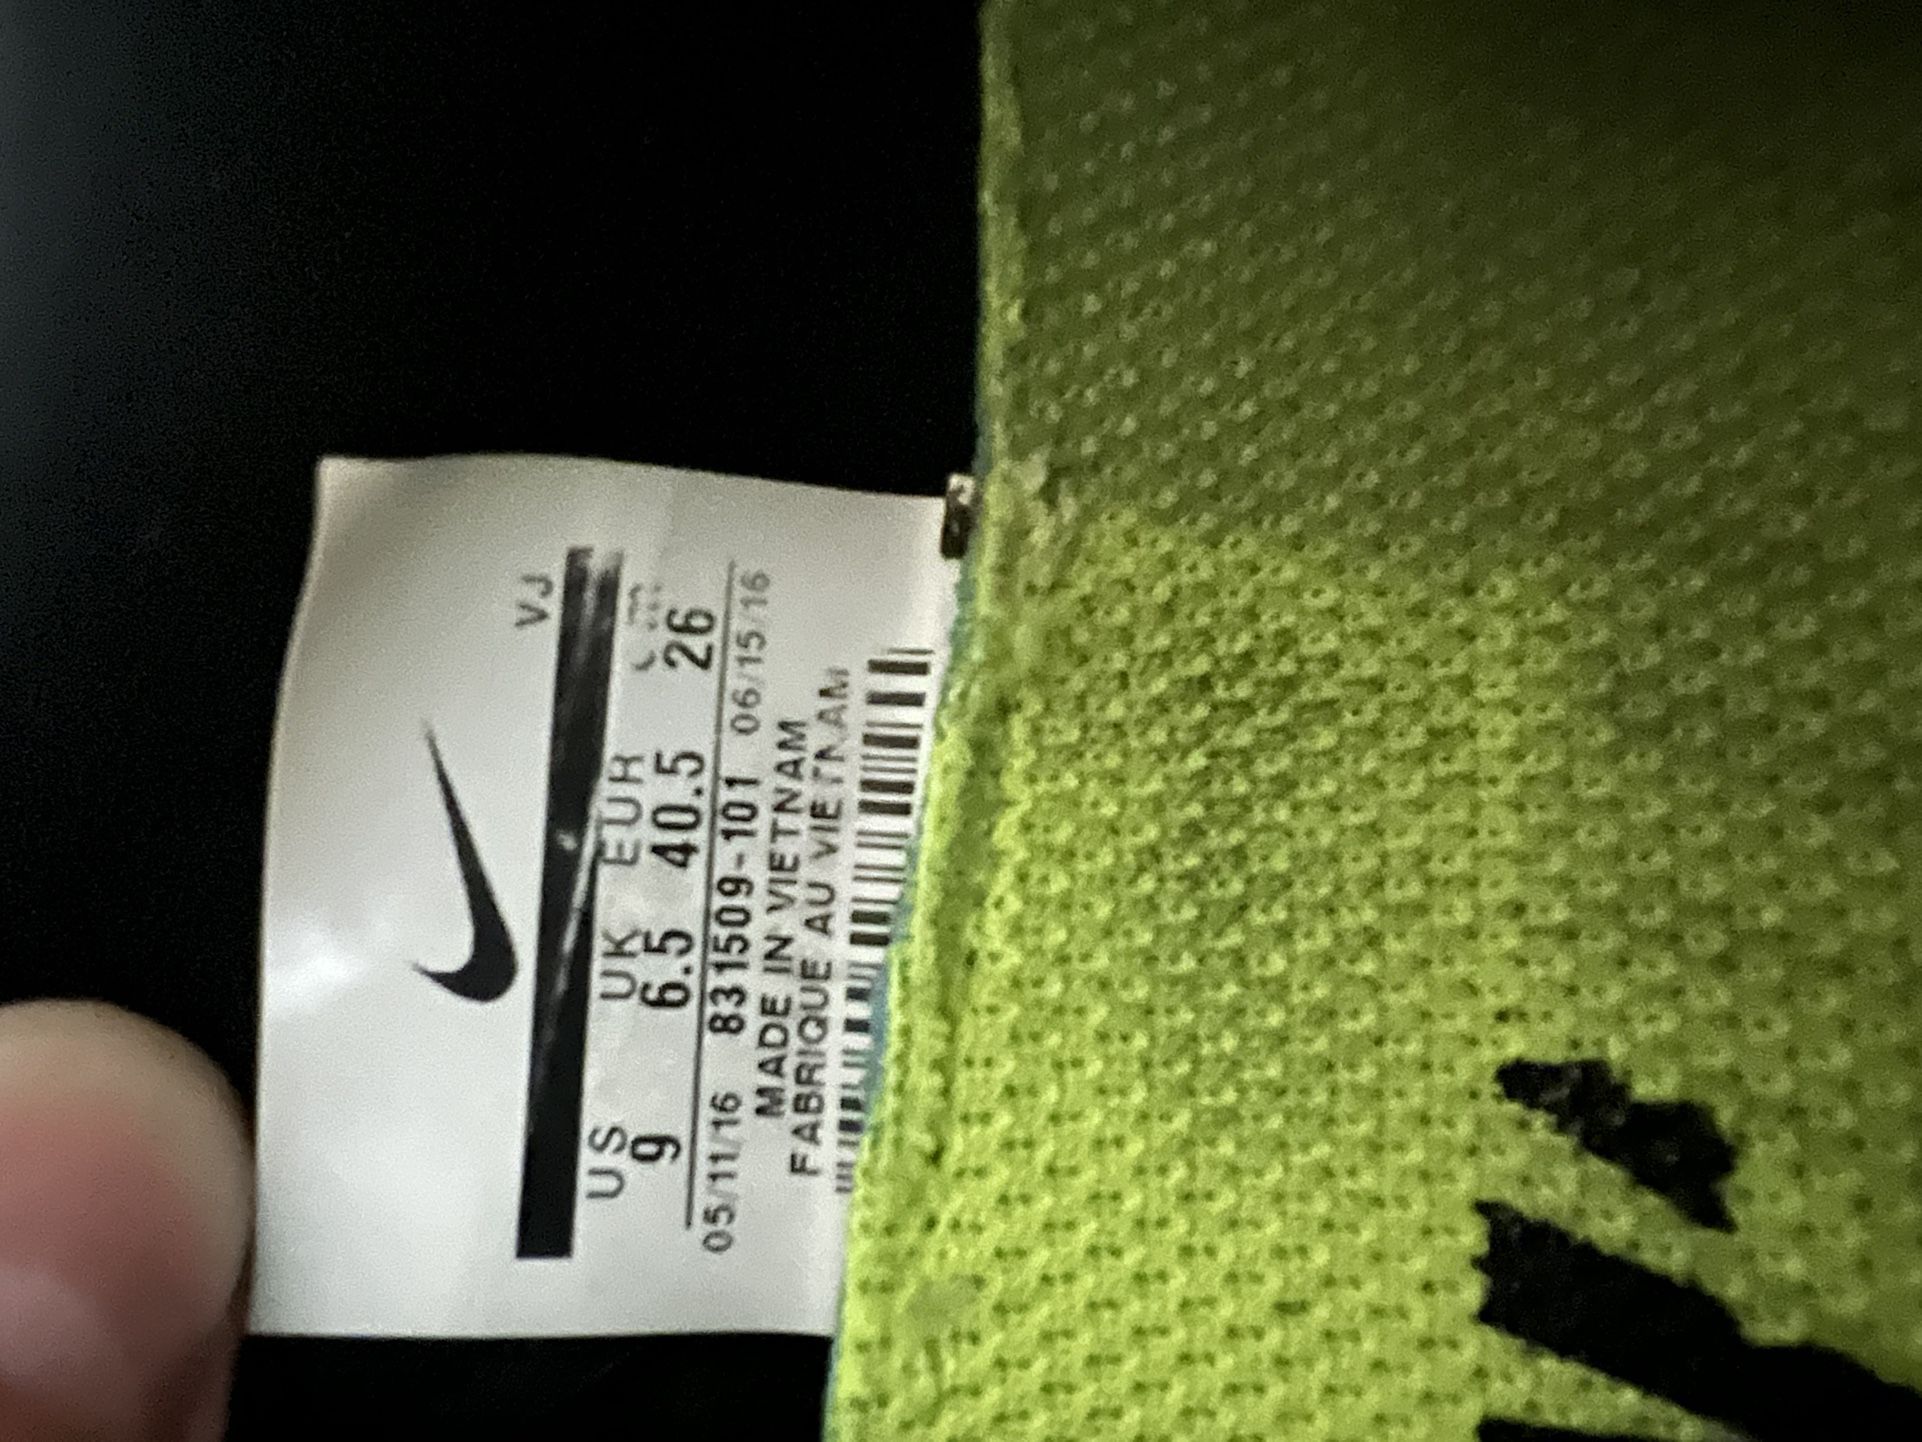 Air Max 270 Size 11 Used for Sale in Queens, NY - OfferUp